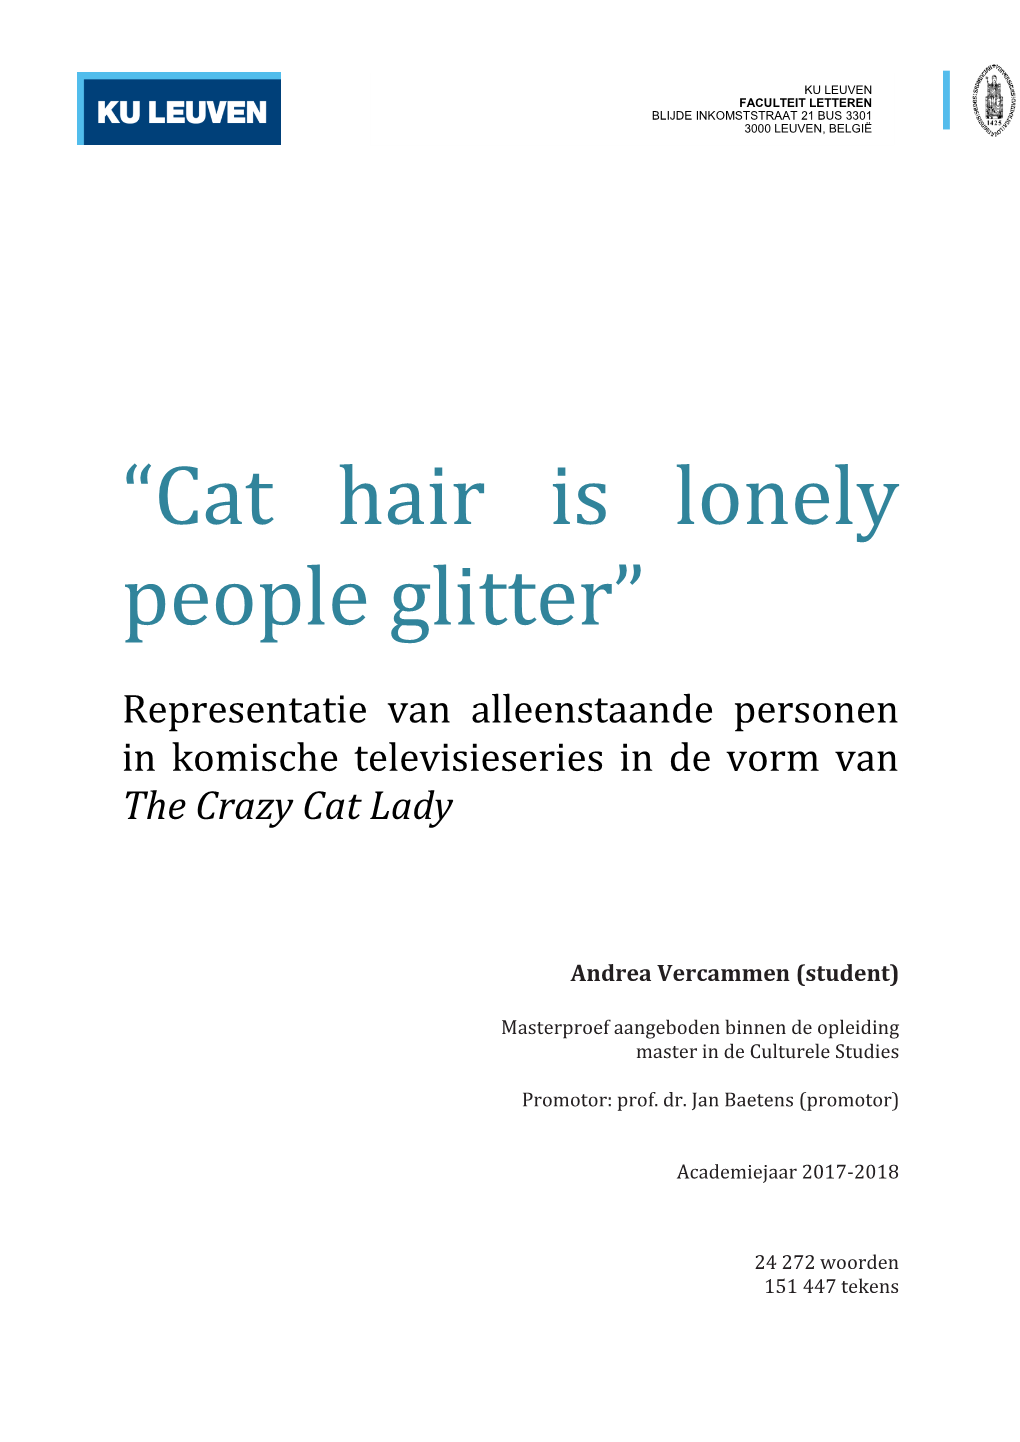 “Cat Hair Is Lonely People Glitter”